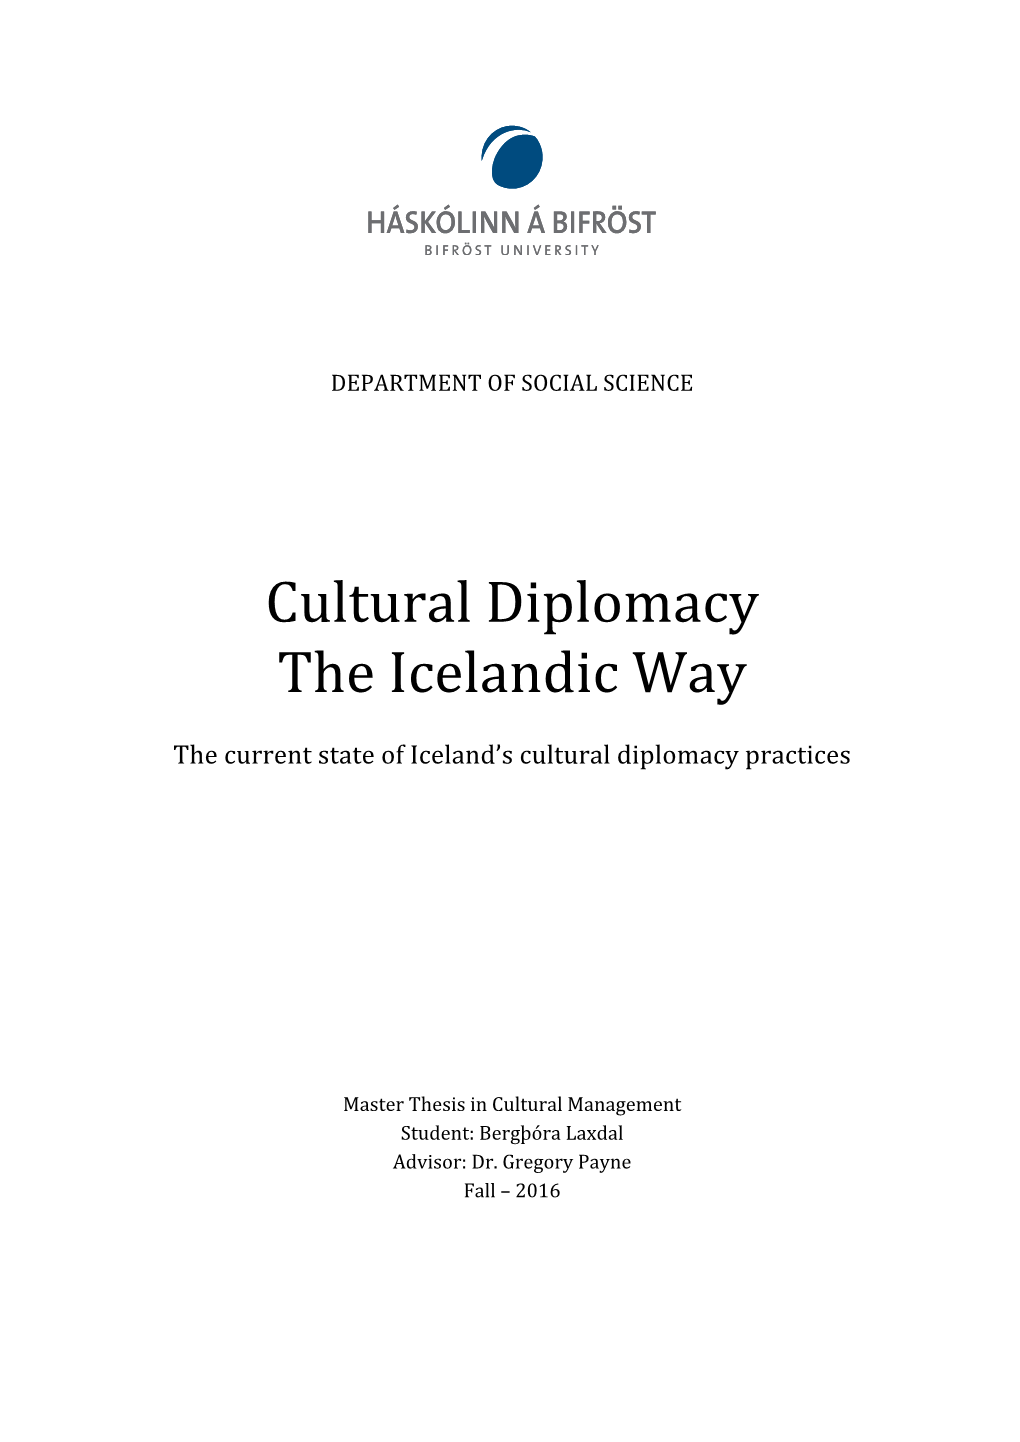 Cultural Diplomacy the Icelandic Way